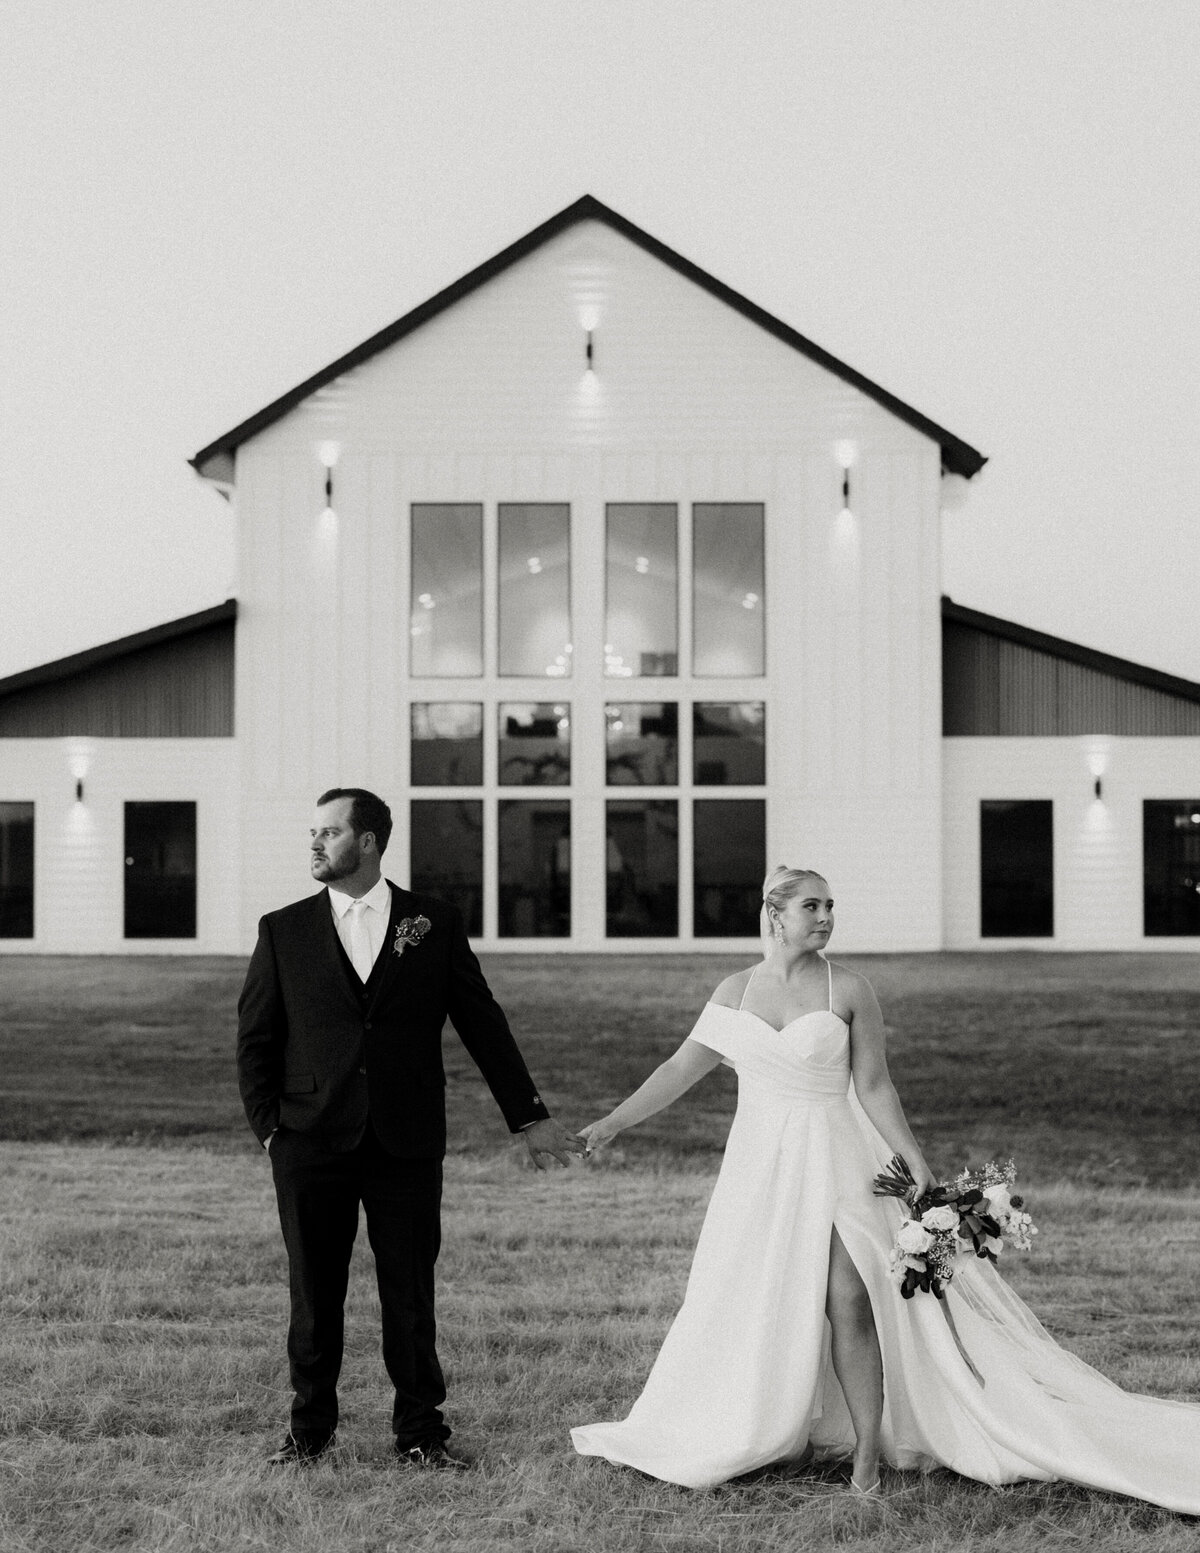 Luxury and romantic wedding photographer based in Minnesota. Specializing in simple but significant documentary wedding photography for all lovers. With a love for serving chic couples, I've had the privilege of photographing over 200 engagements, elopements, and weddings since 2018.